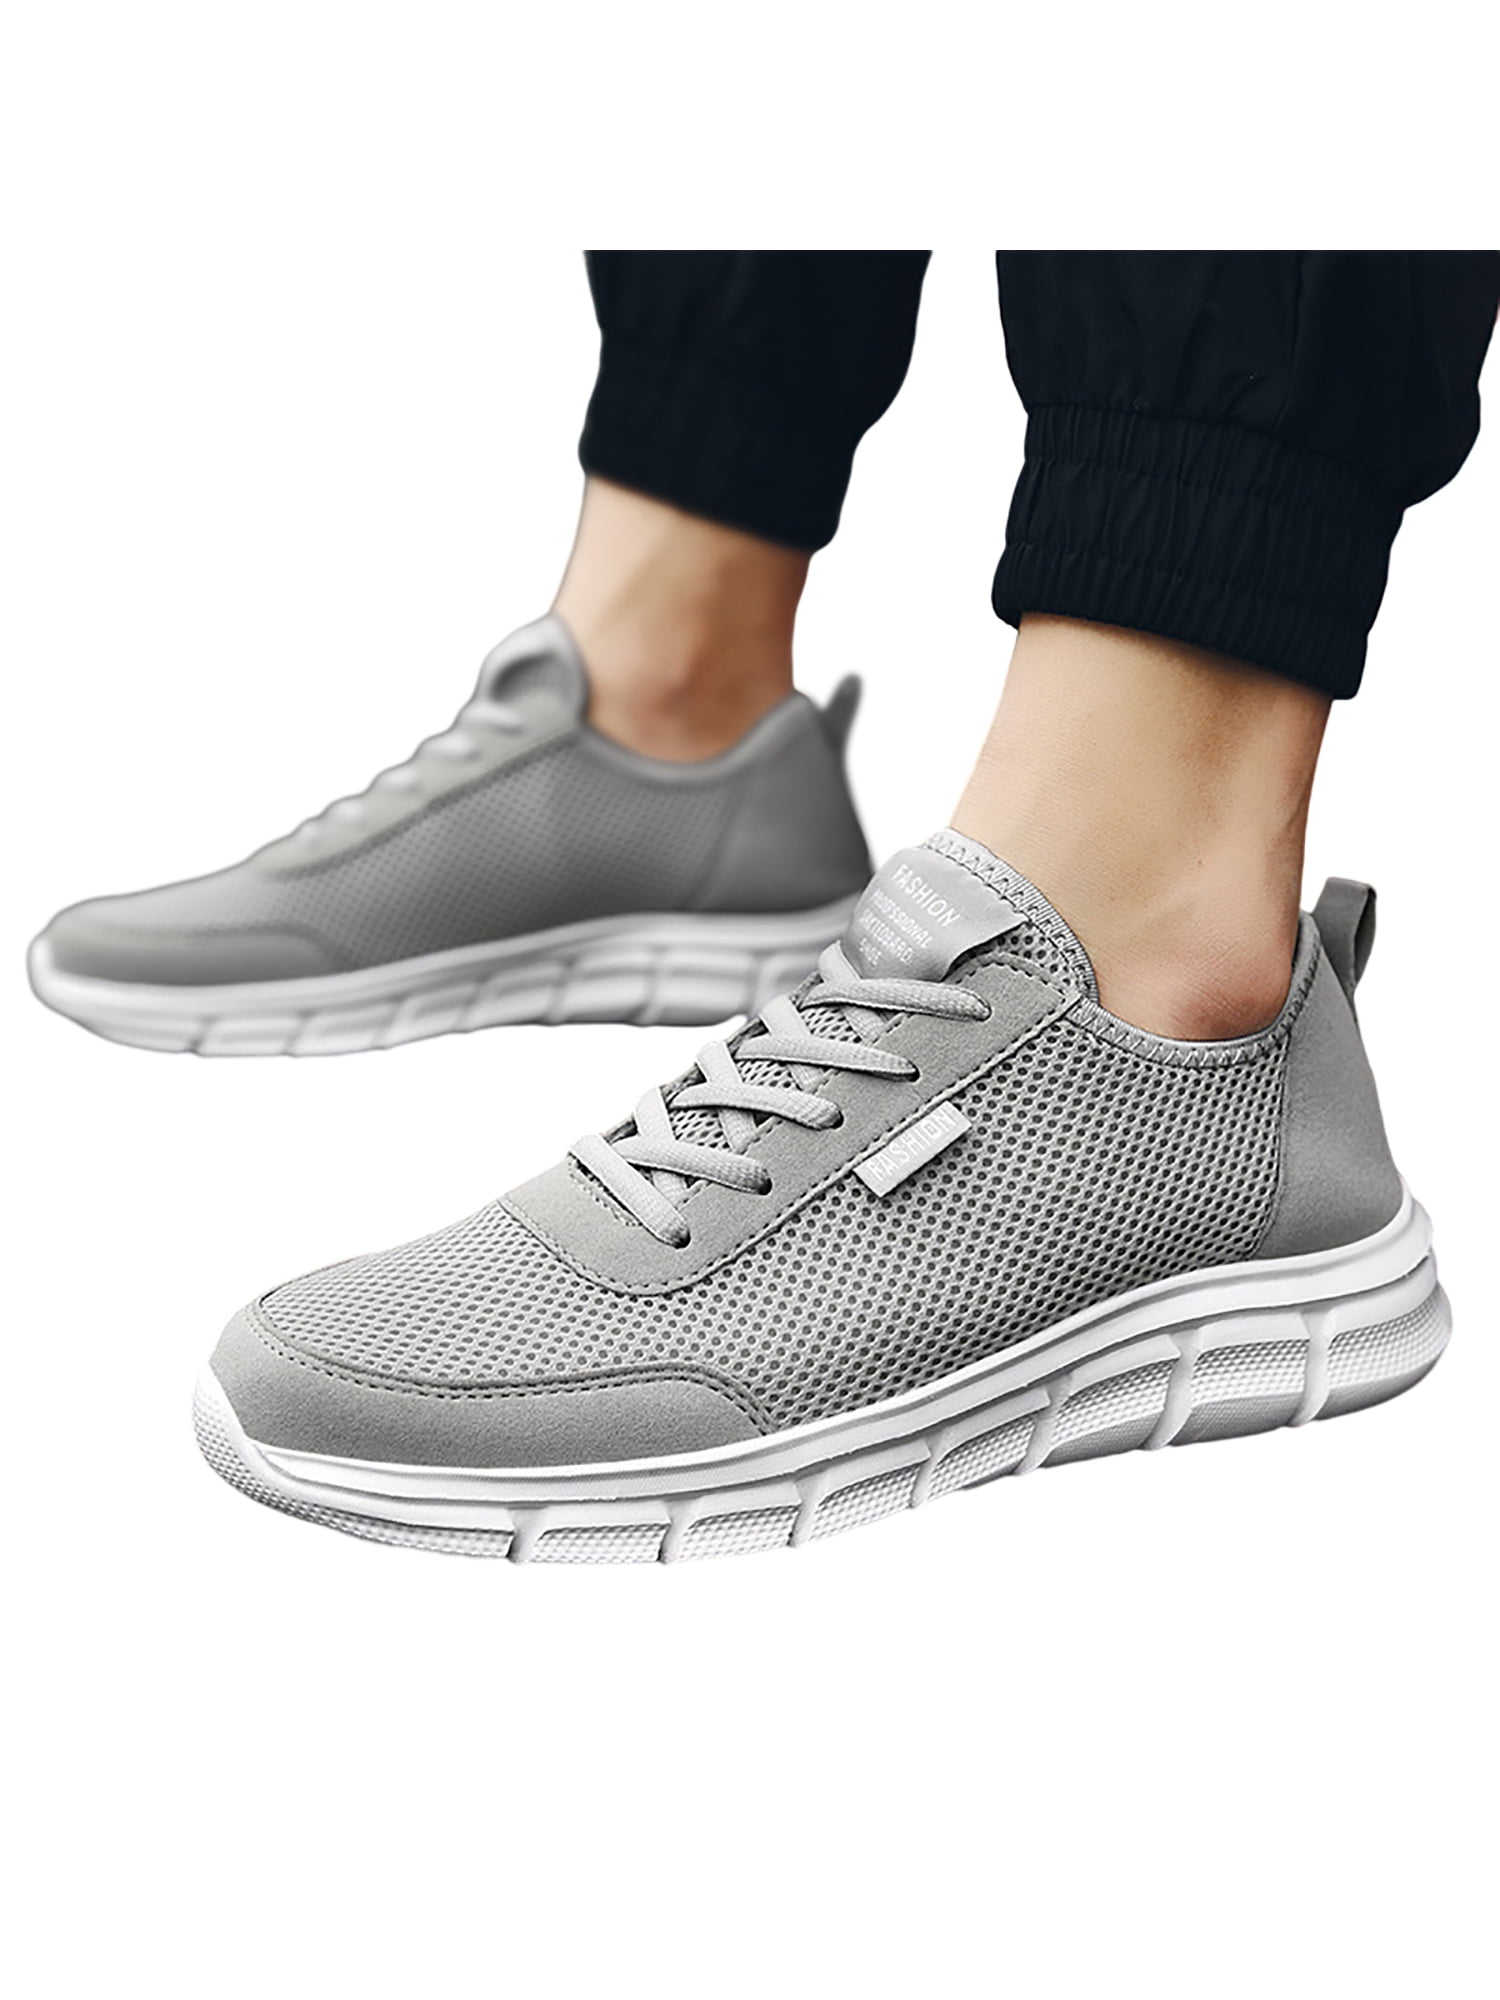 Men's Sneakers Casual Breathable Athletic Running Tennis Shoes Sports Gym 12